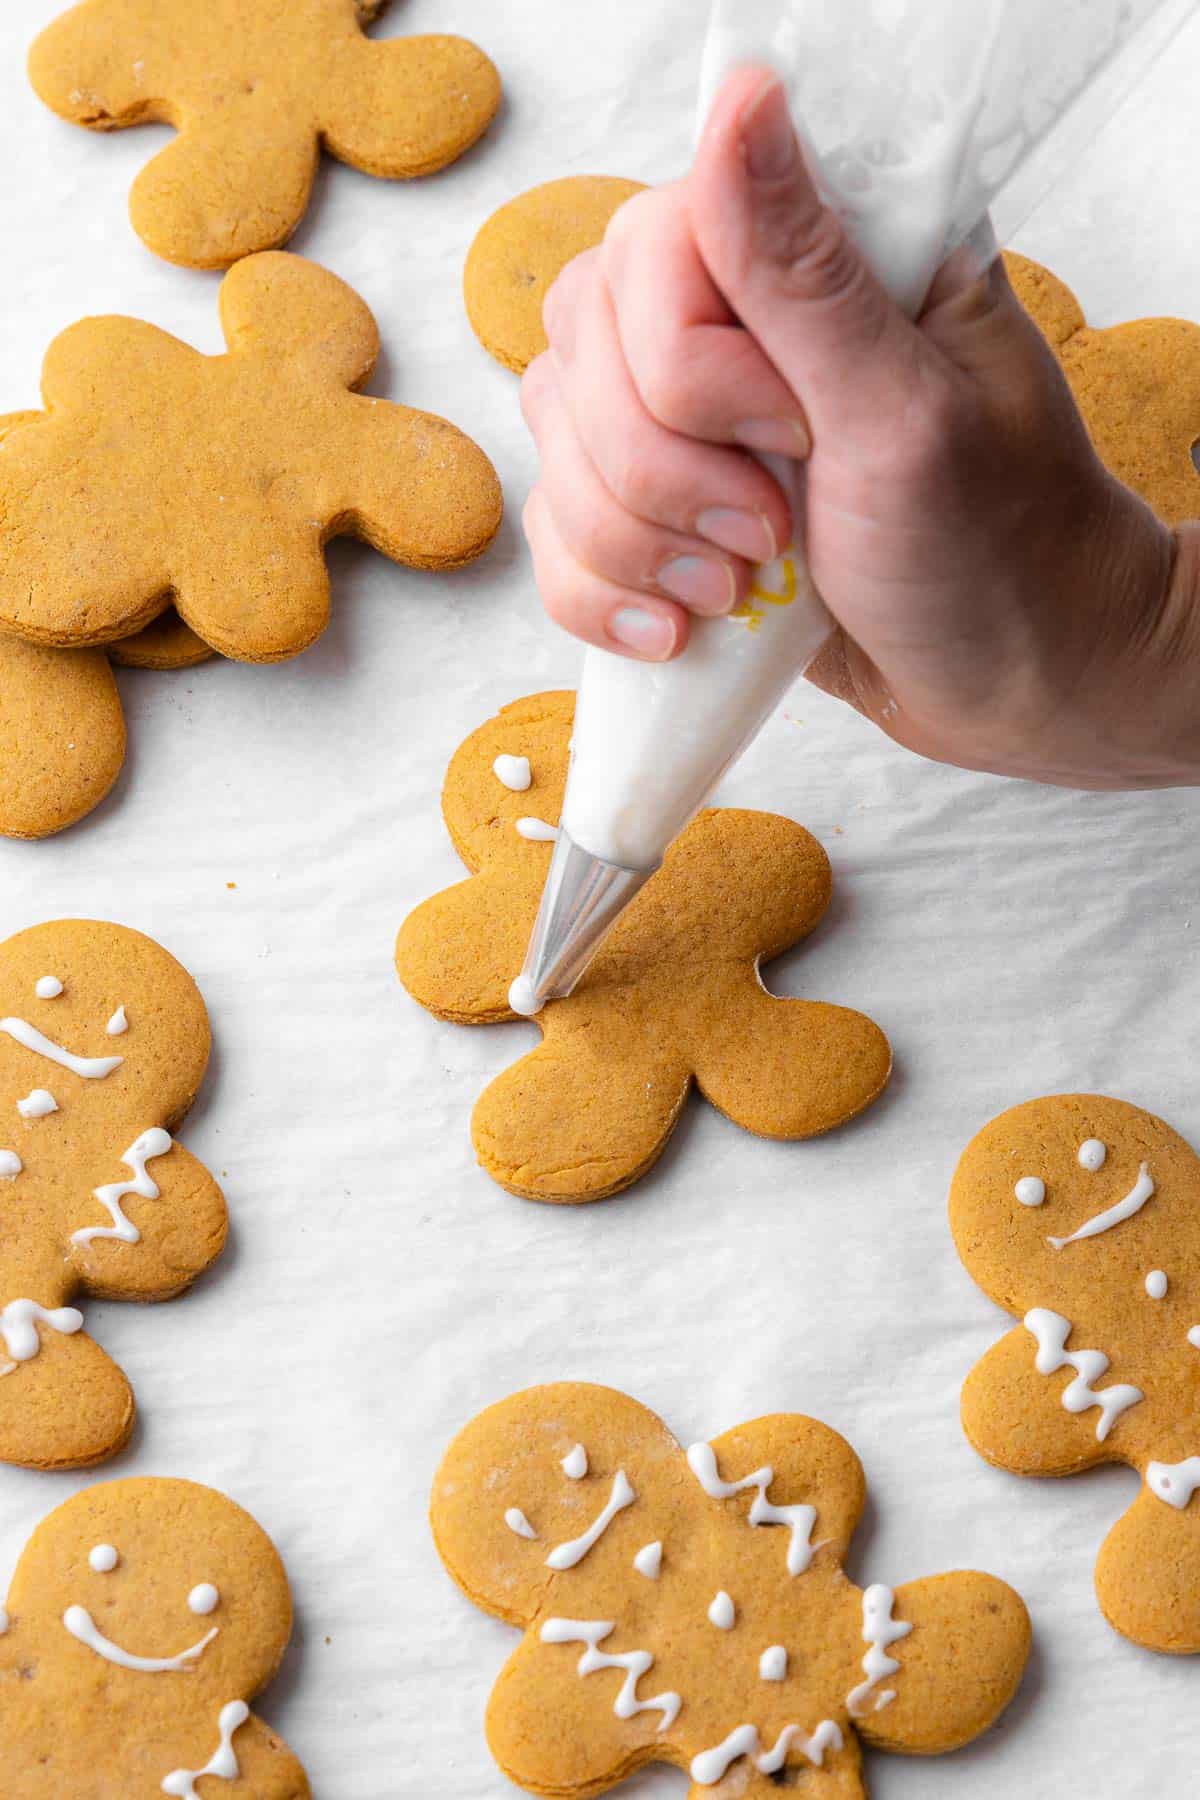 Piping icing decorations onto a gingerbread cookie with more cookies around.